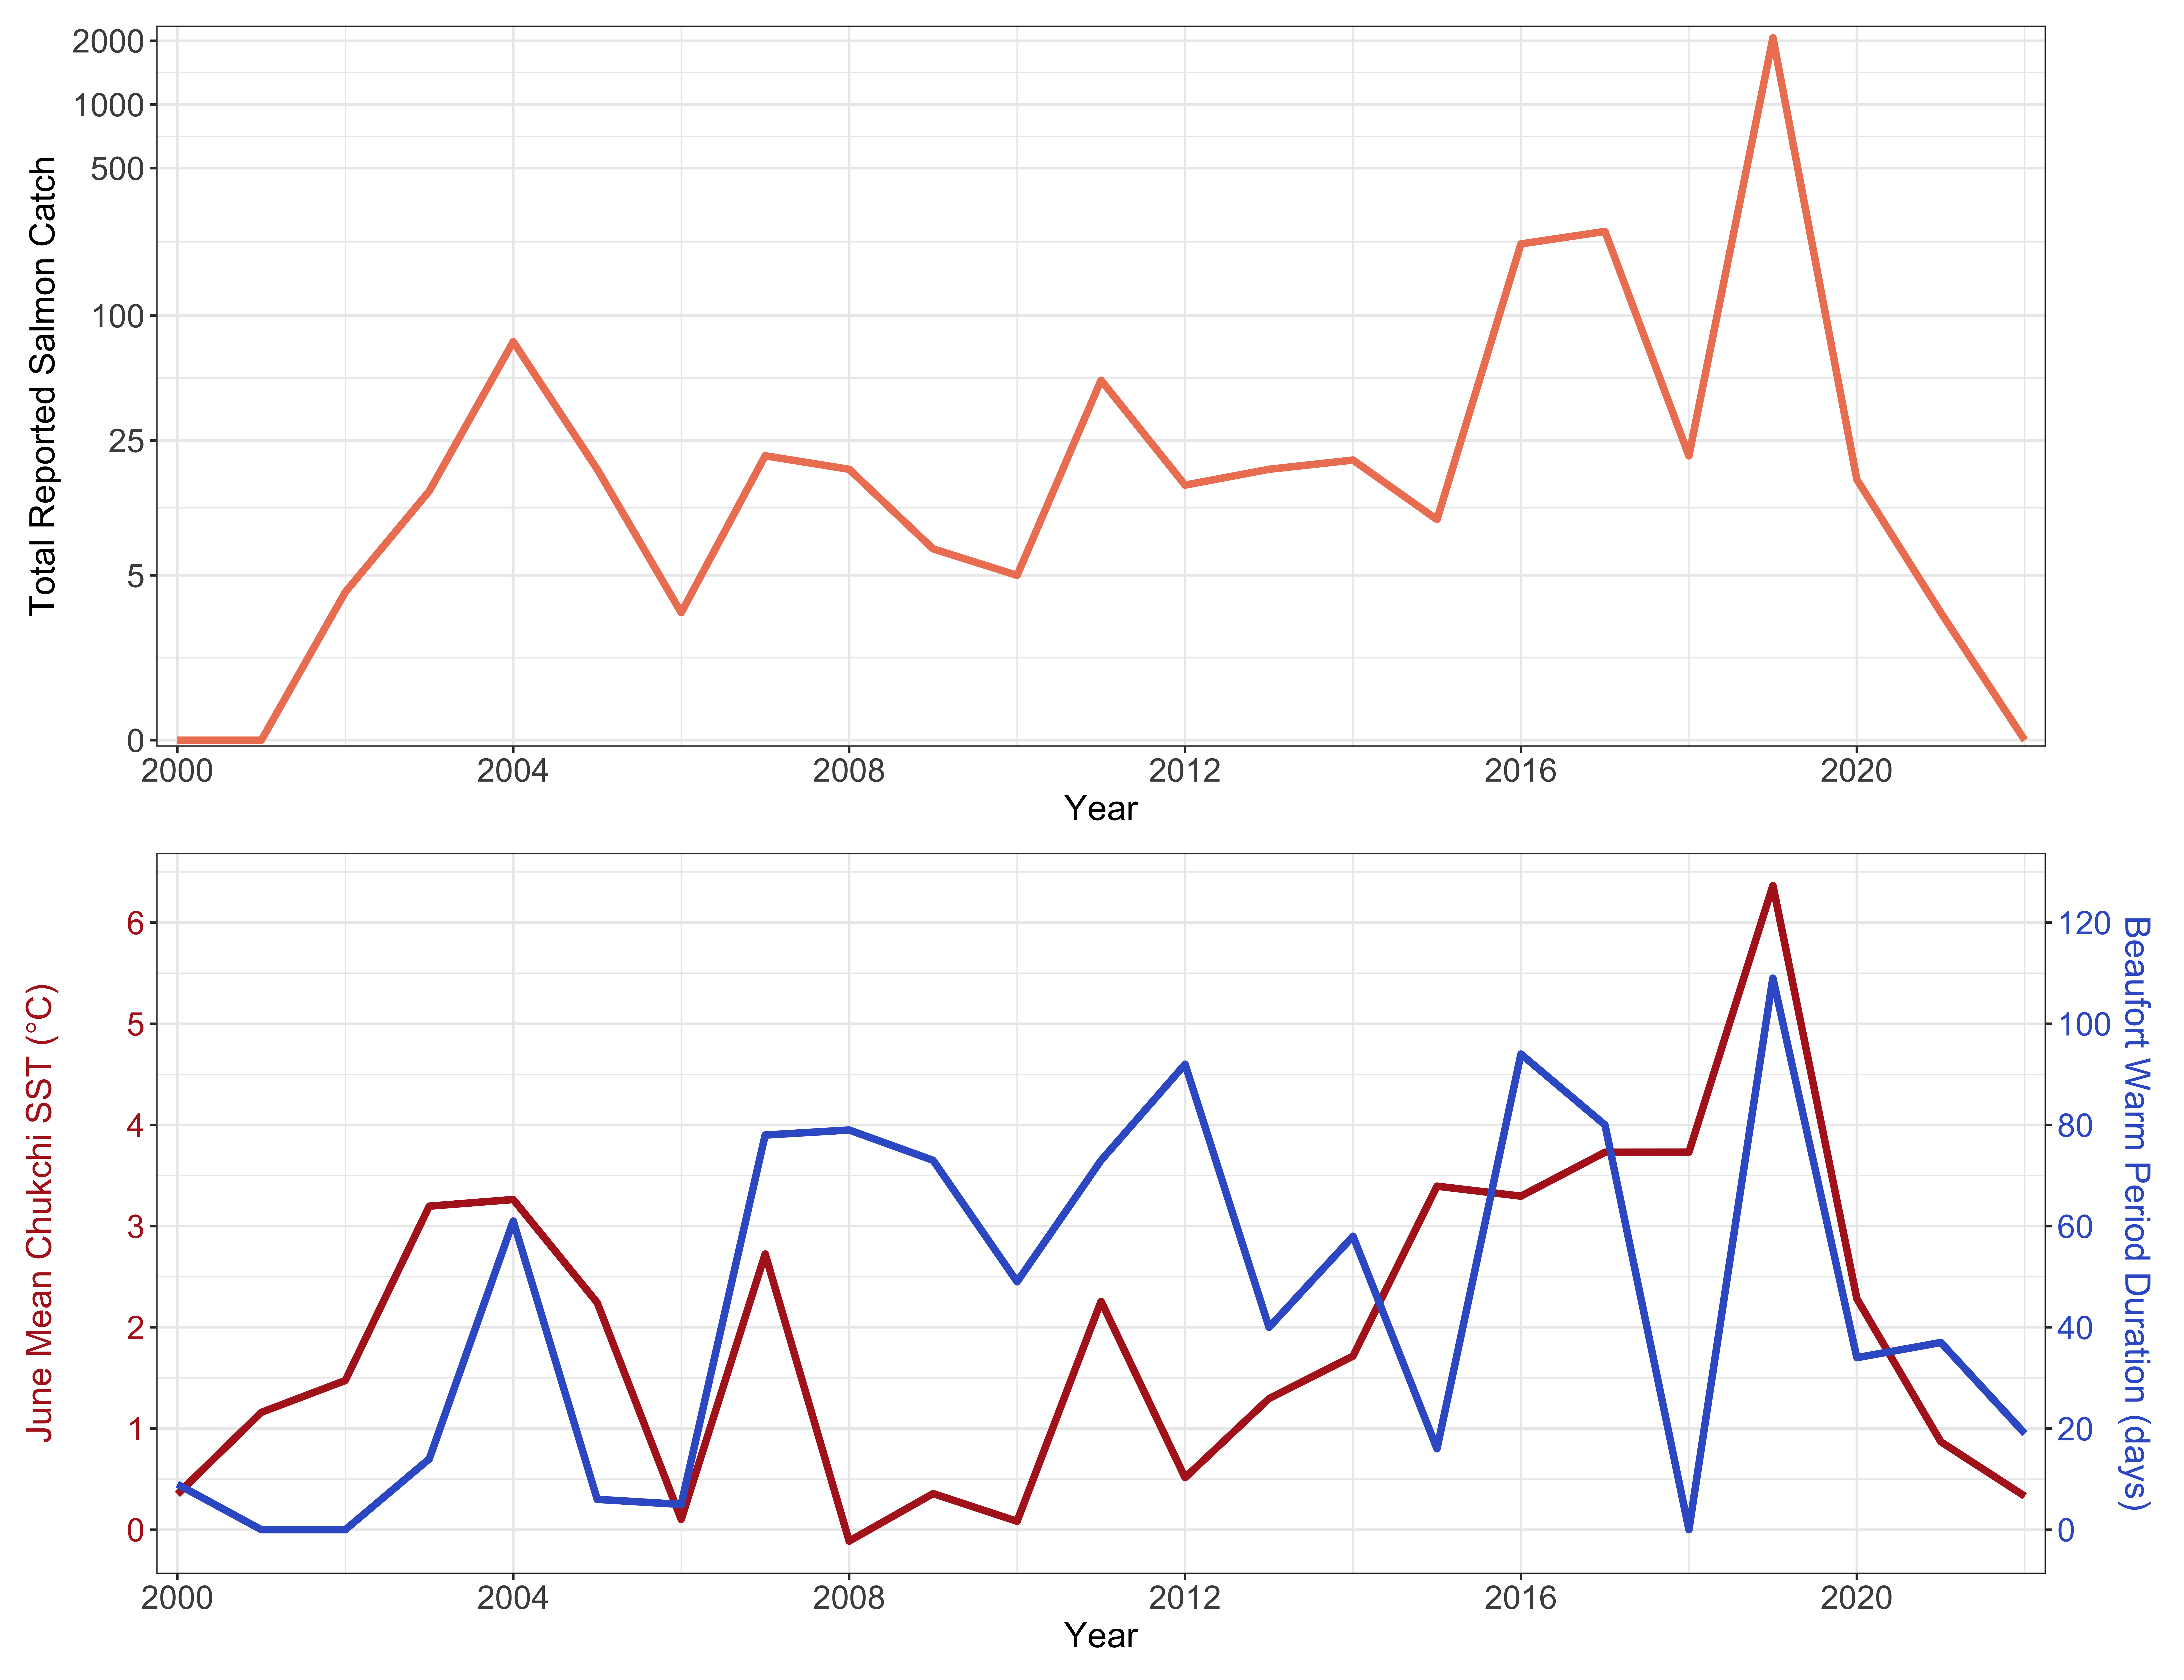 Graphs show a correlation between the number of salmon caught in the western Canadian Arctic (top) and relatively warm ocean conditions in the Chukchi and Beaufort seas (bottom).